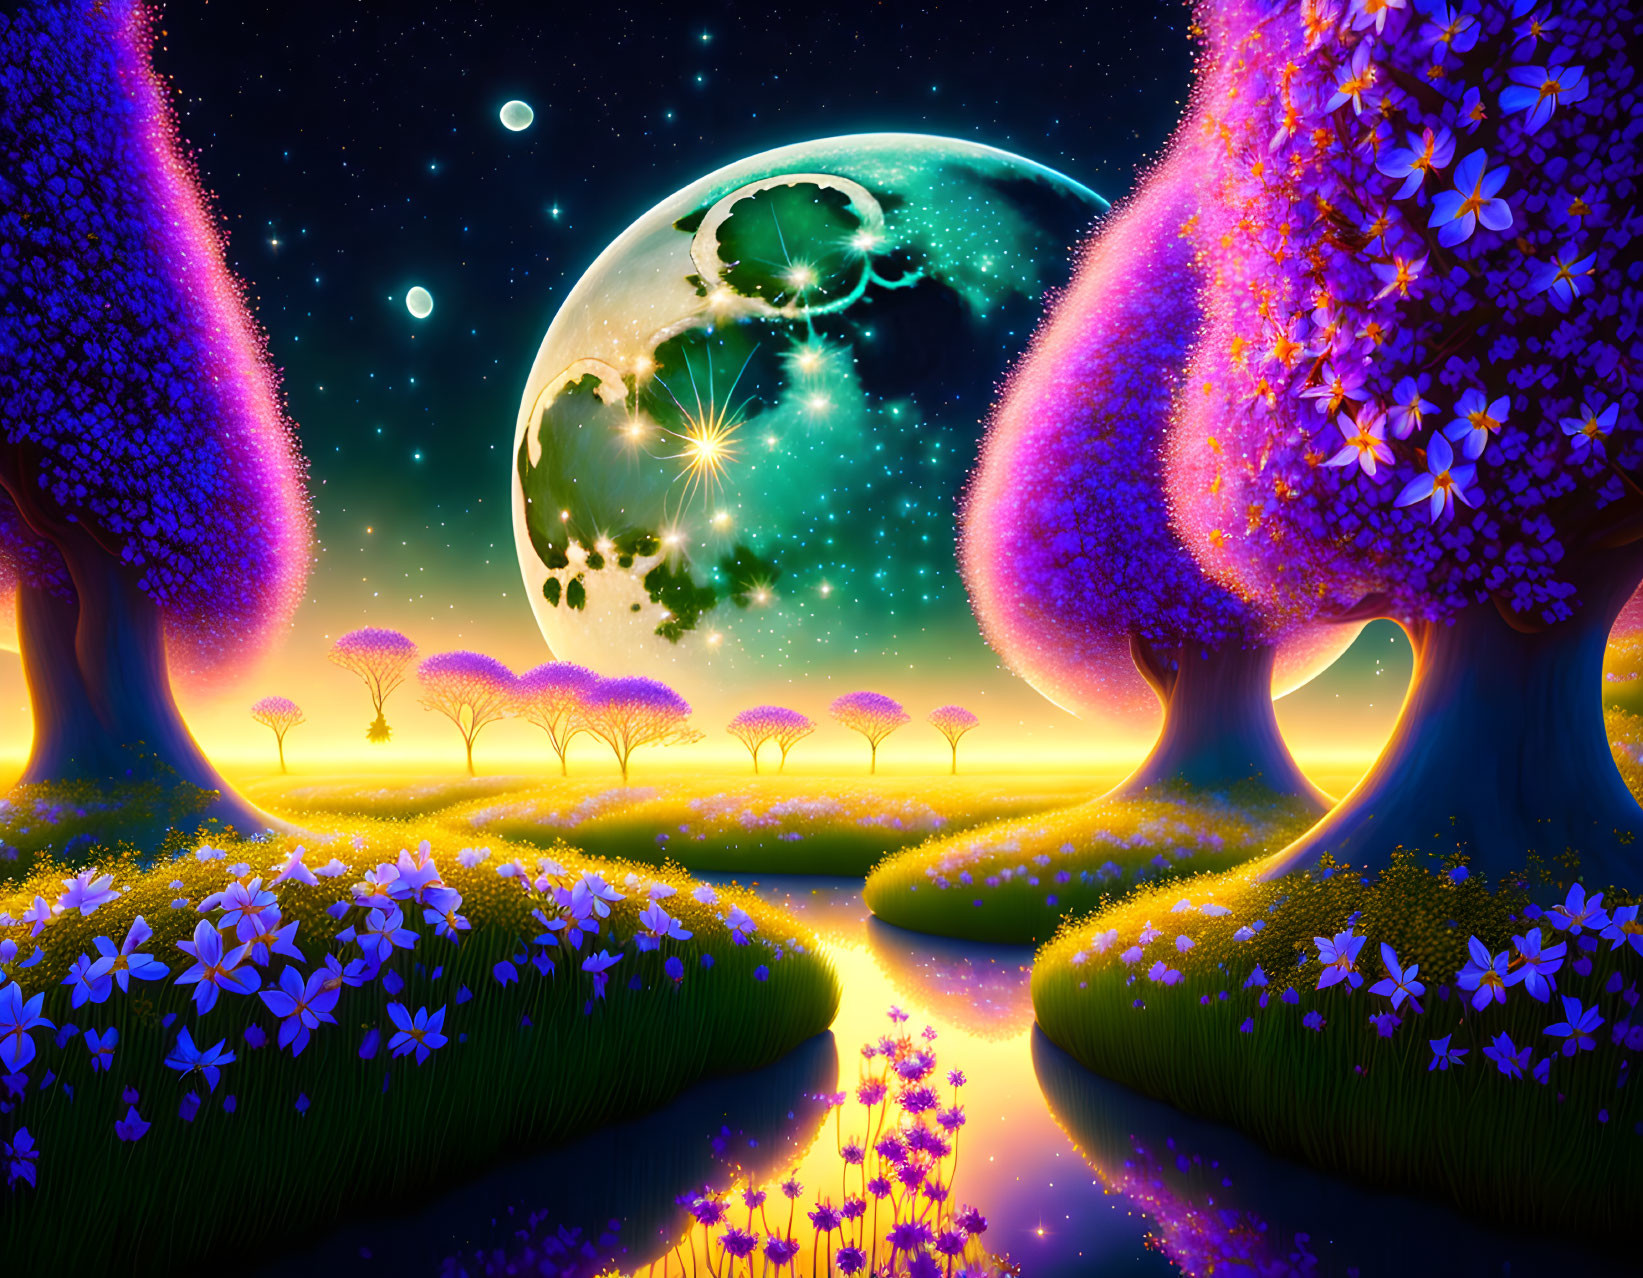 Nighttime fantasy landscape with luminescent trees, reflective river, oversized moon.